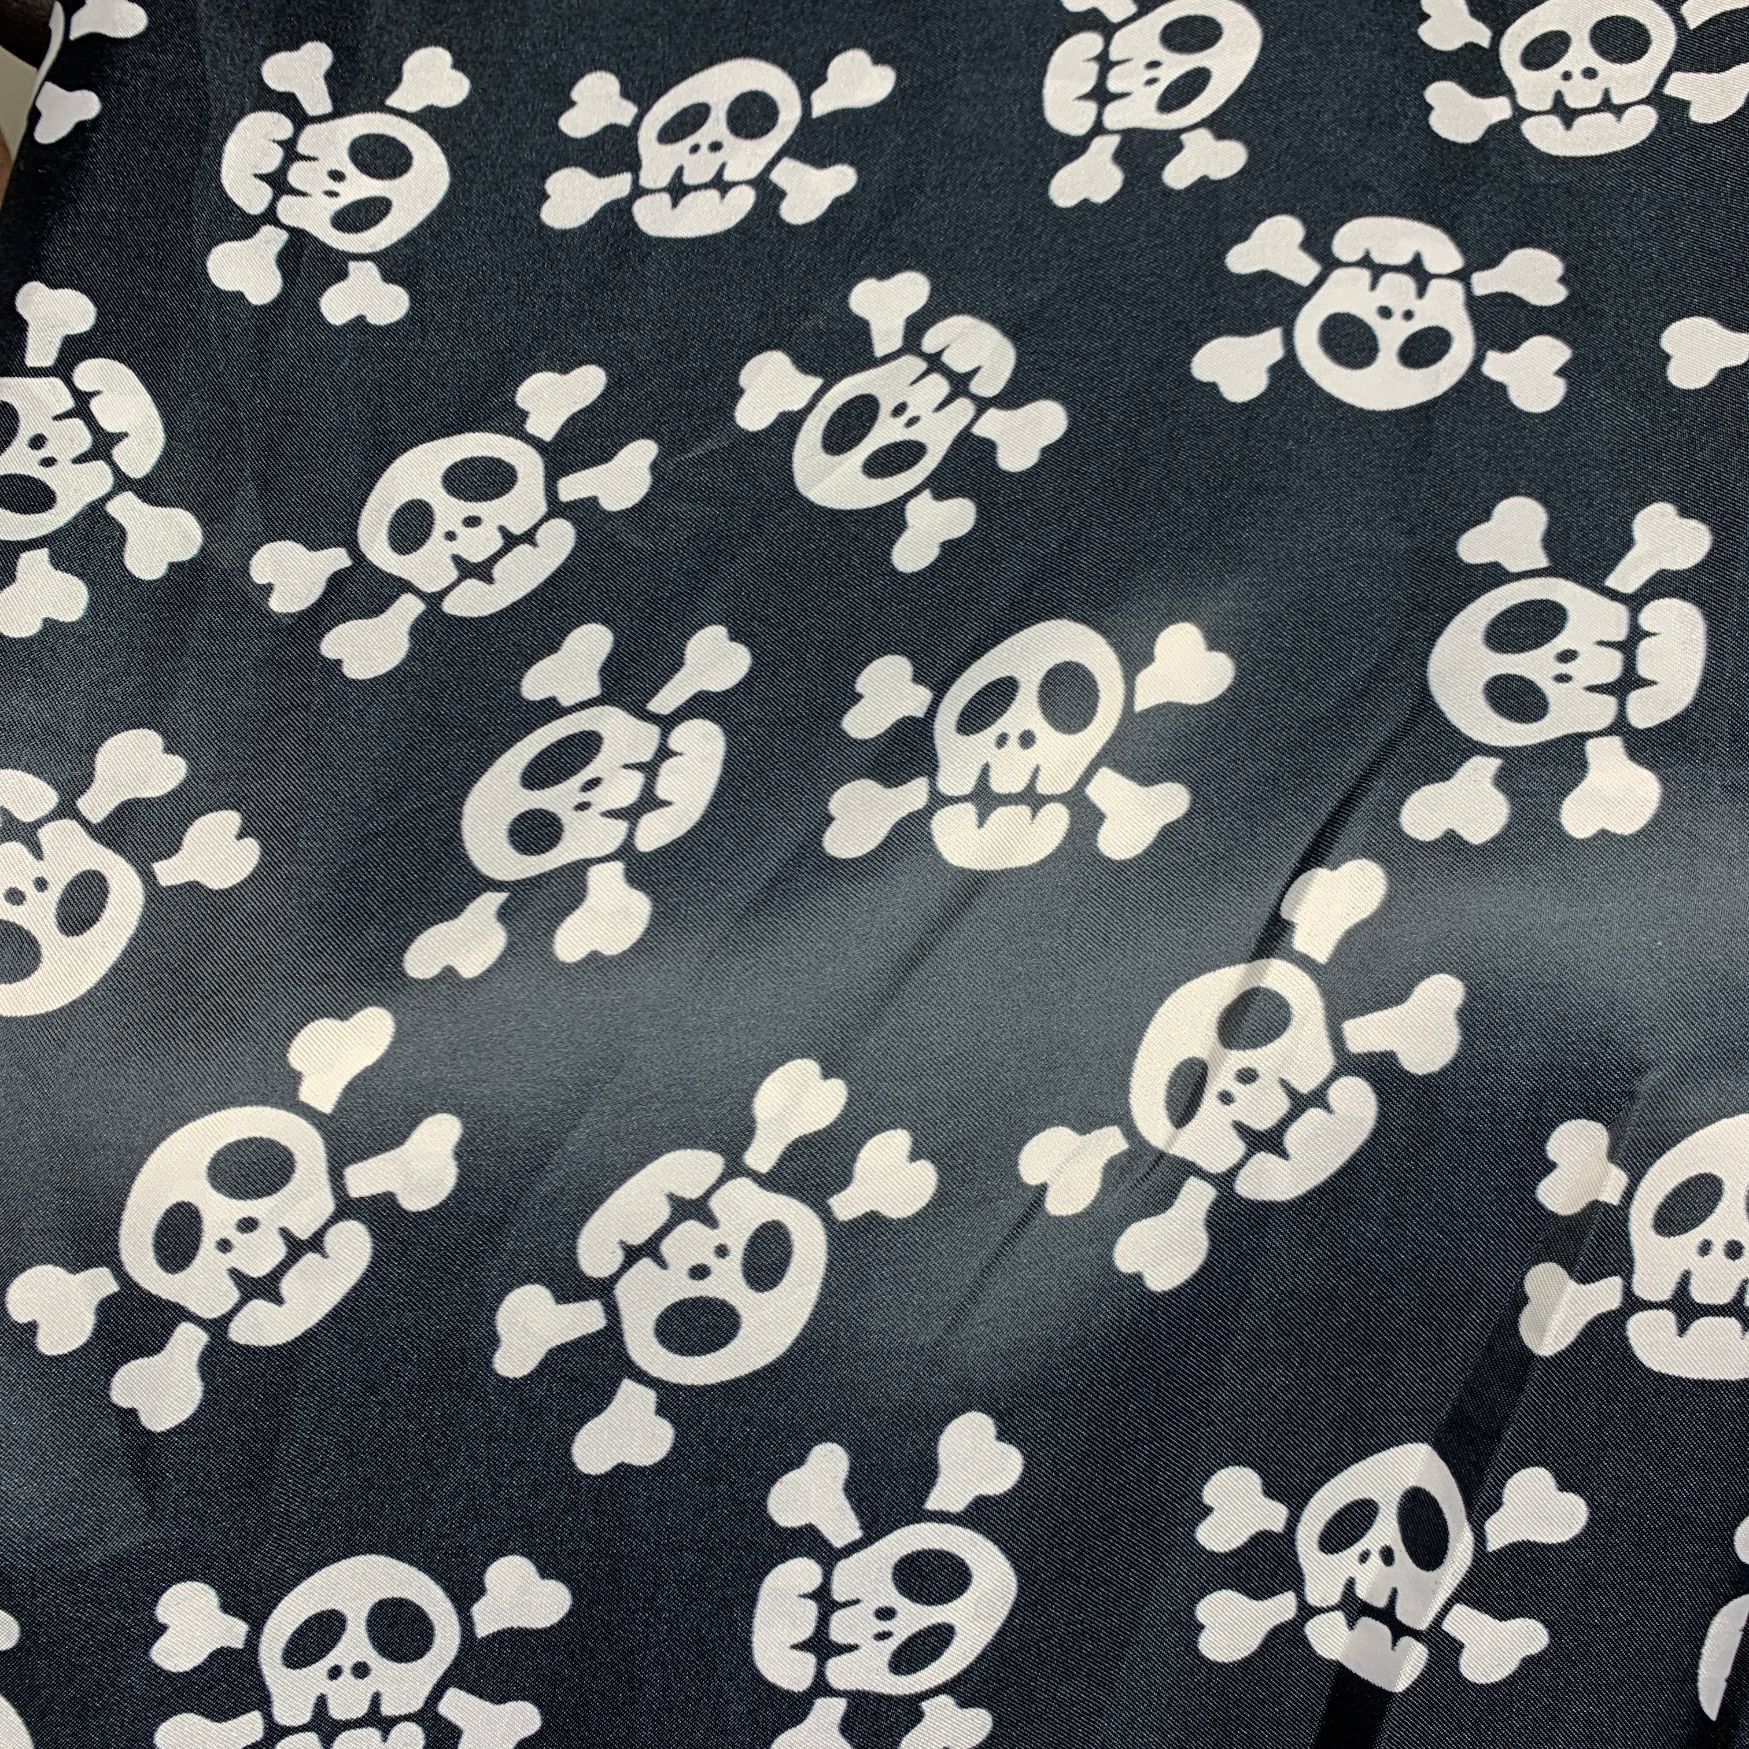 PIRATE BAY TABLECLOTH - Eventlyst